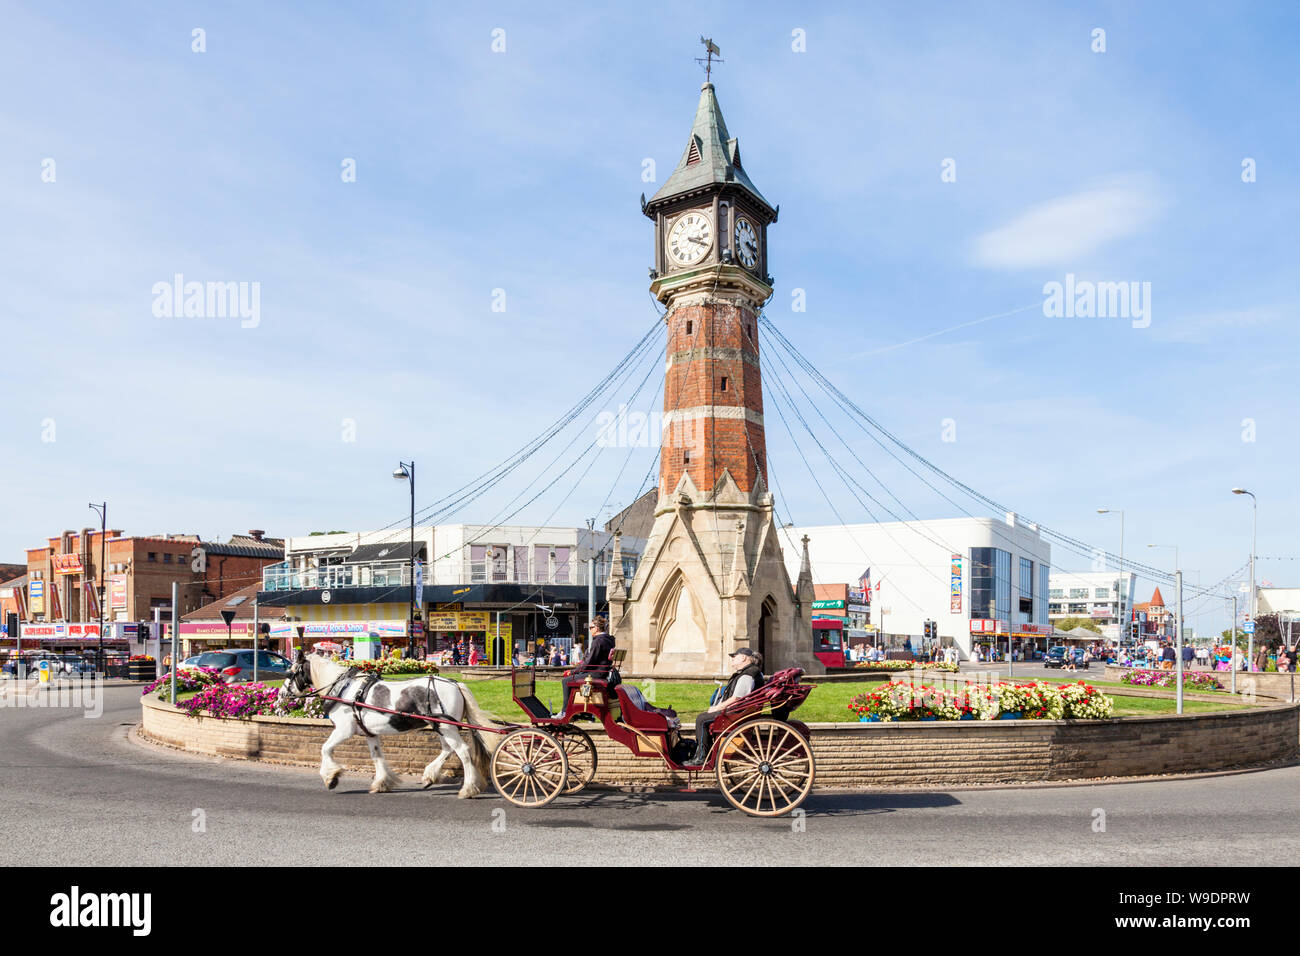 Horse and carriage passing by the Clock Tower, Skegness town centre, Lincolnshire, England, UK Stock Photo